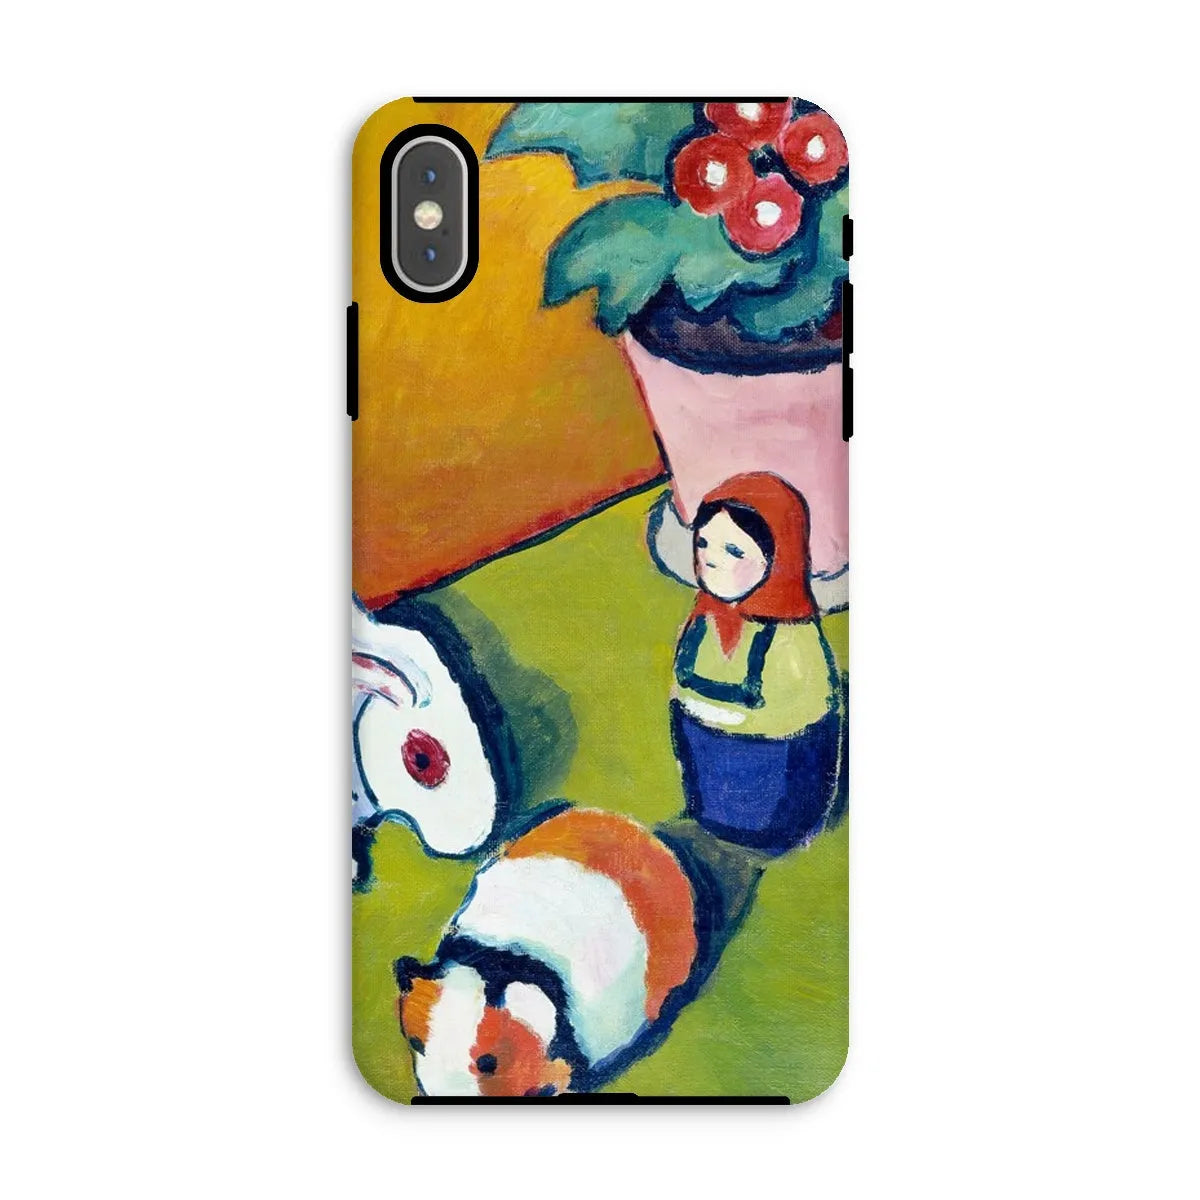 Little Walter’s Toys Art Phone Case - August Macke - Iphone Xs Max / Matte - Mobile Phone Cases - Aesthetic Art